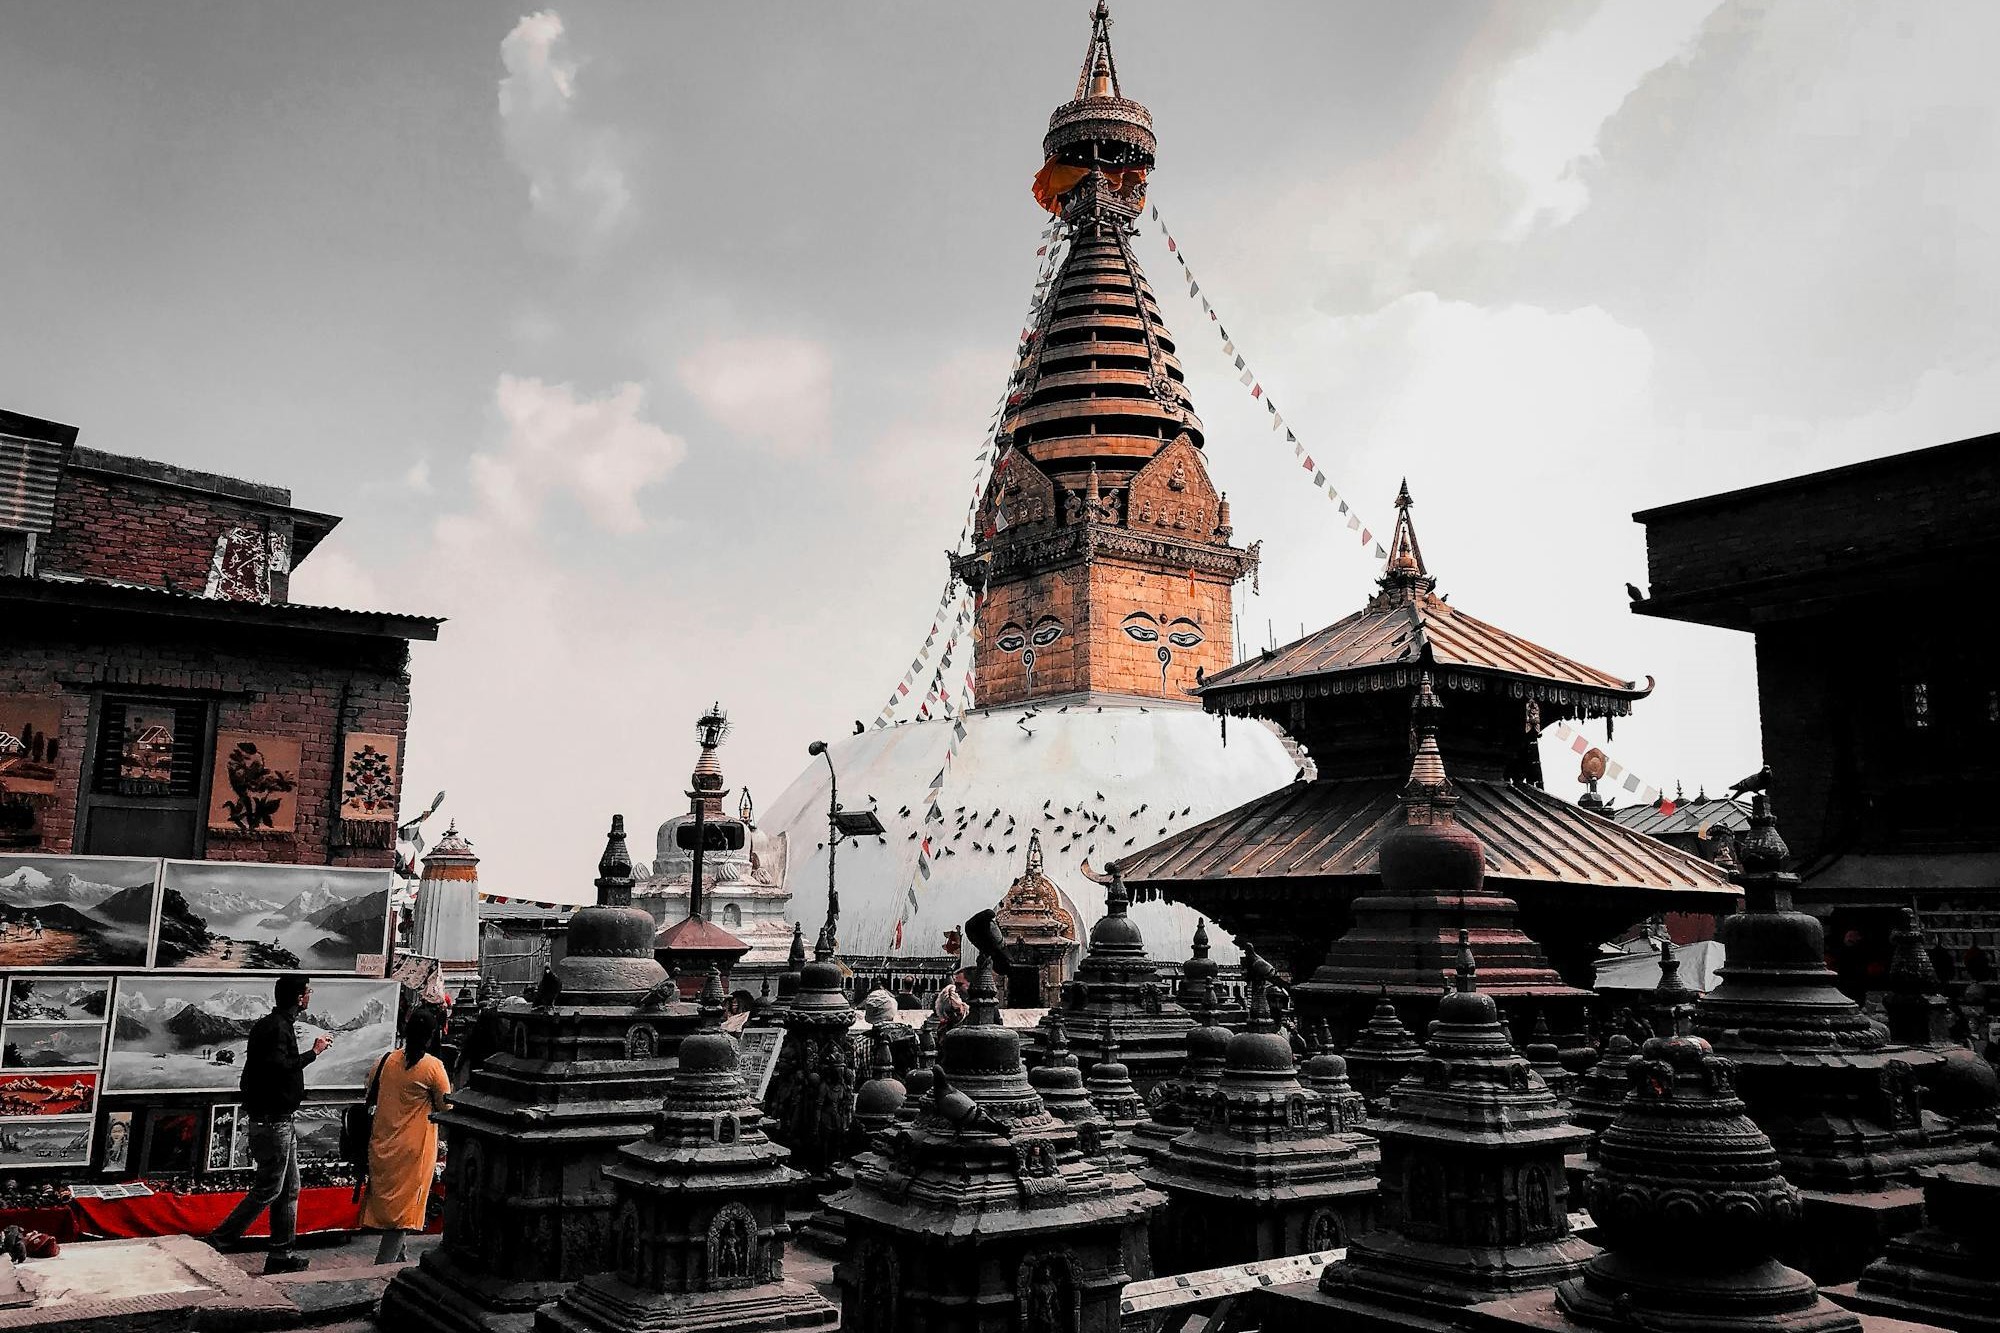 Explore Nepal's Natural Wonders with Divine Nature: Tours, Treks, and More